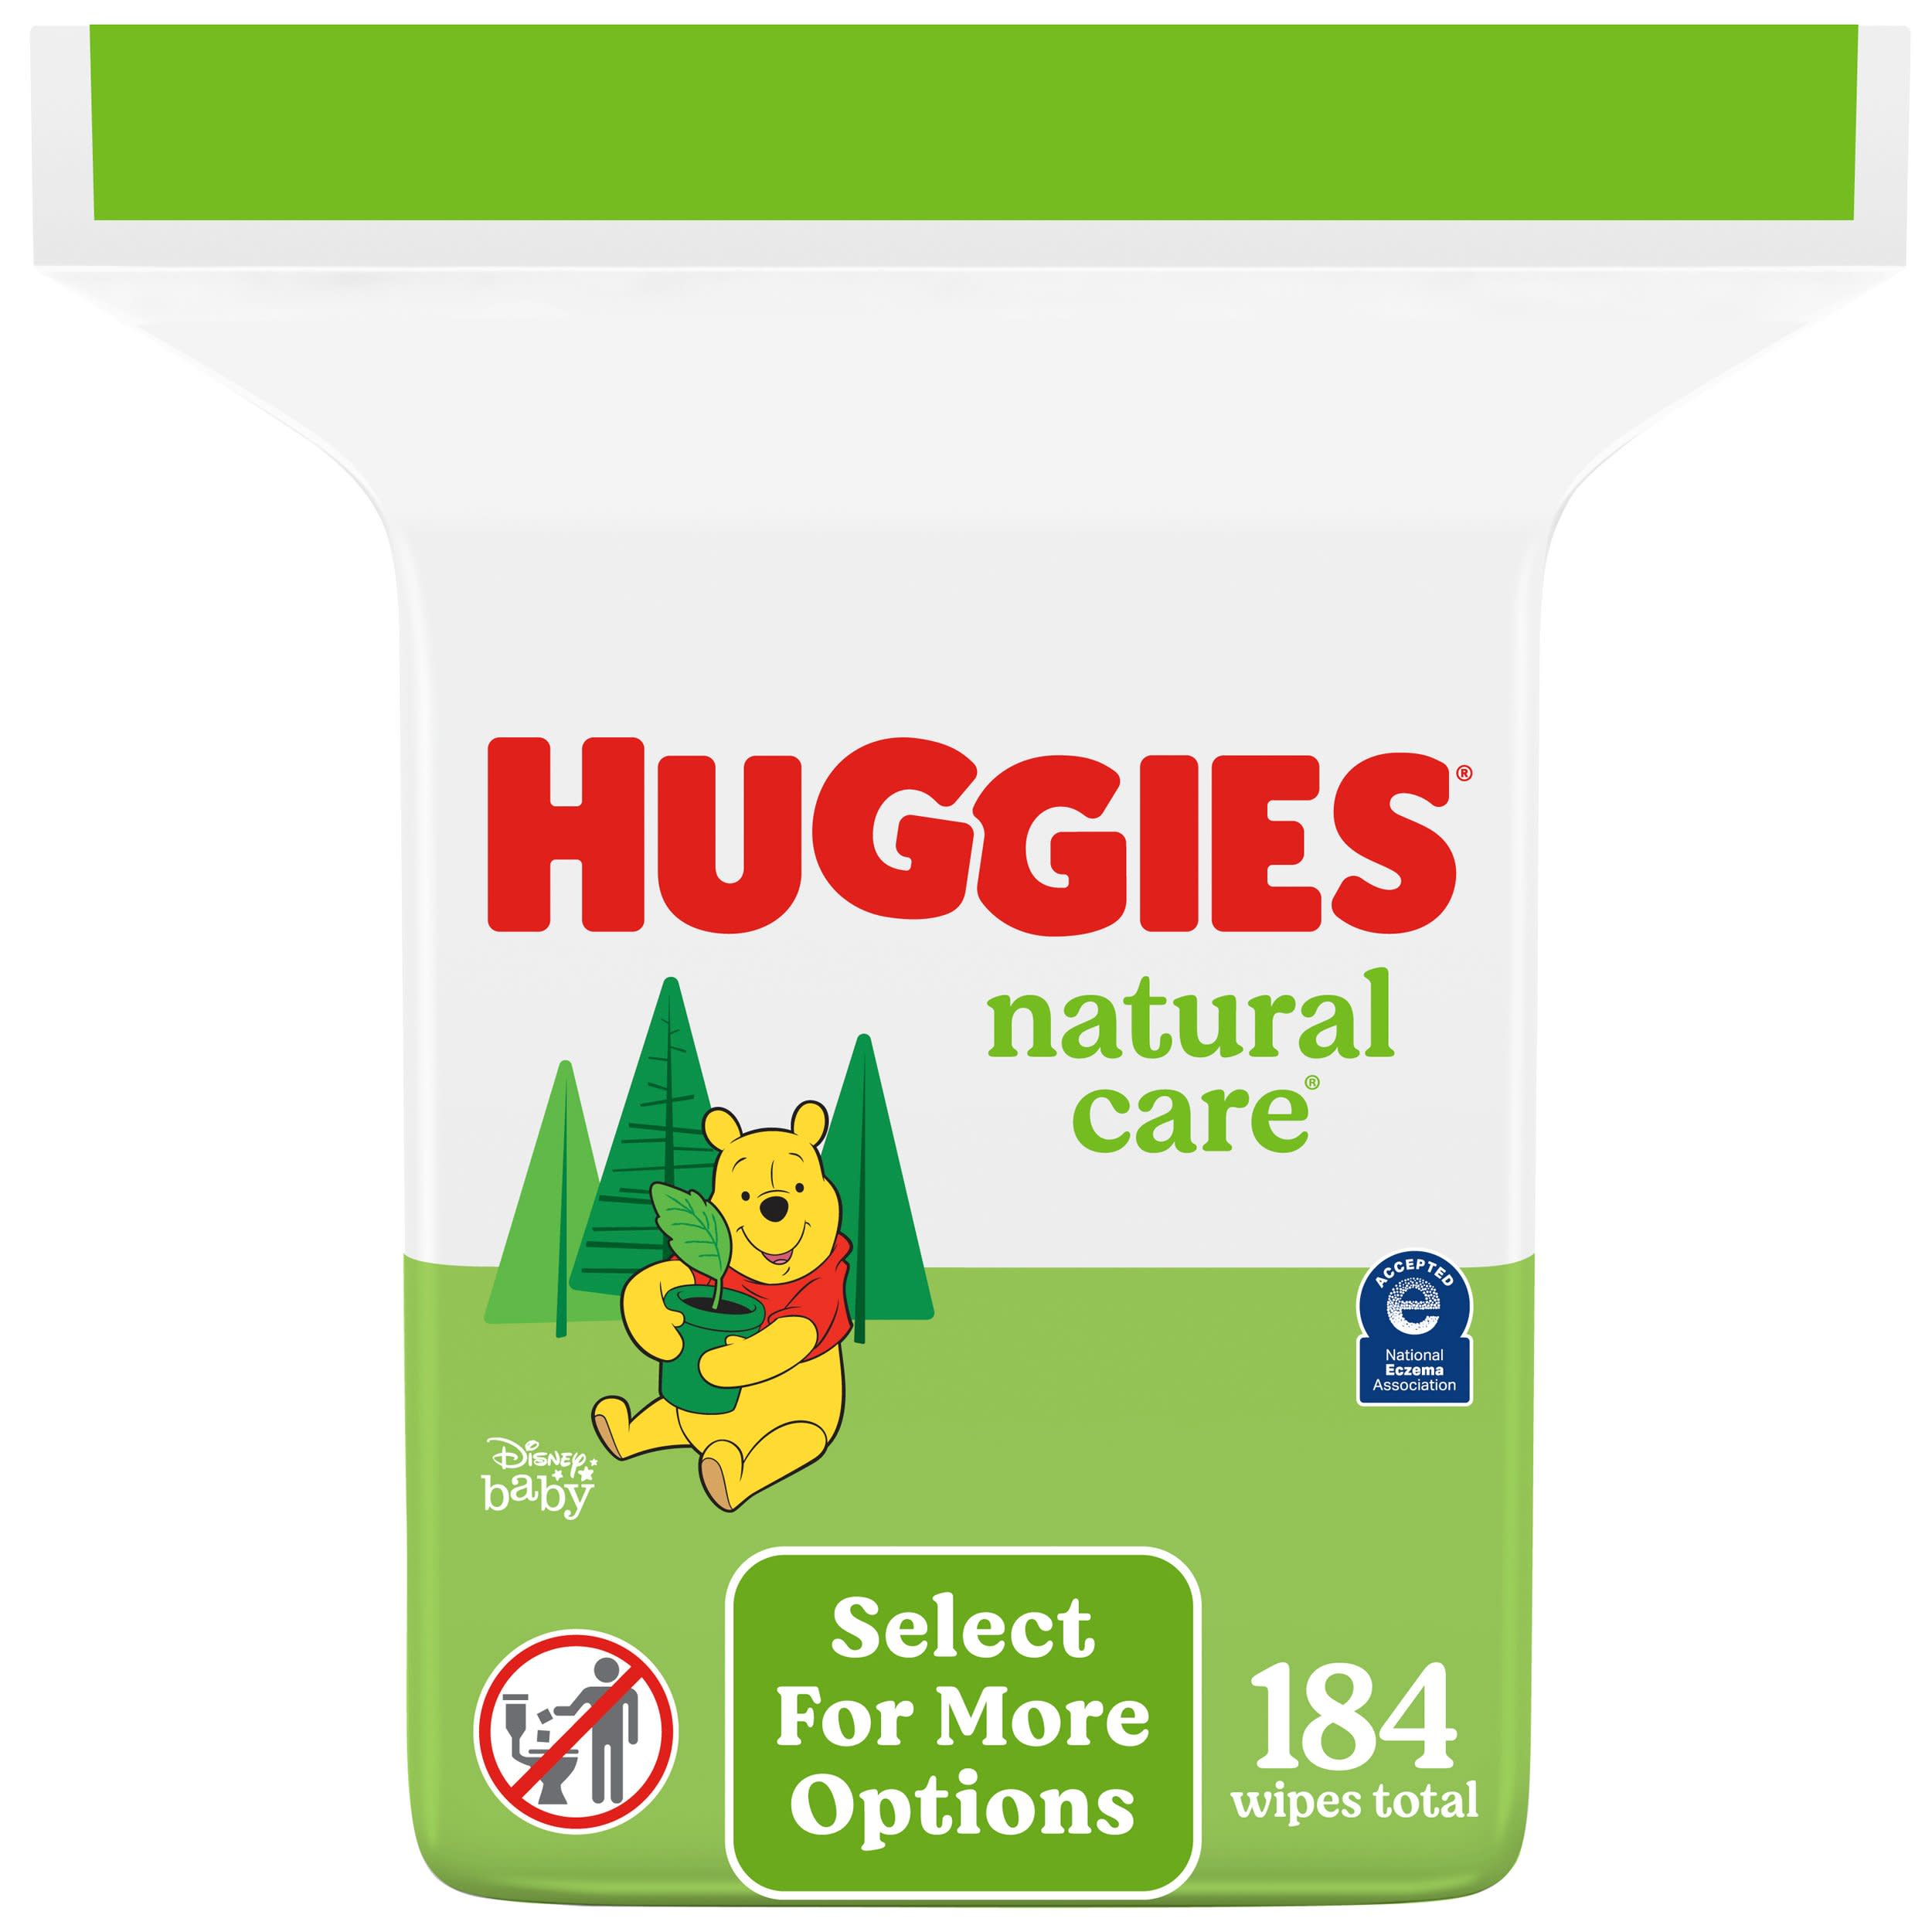 Huggies Natural Care Sensitive Baby Wipes, Unscented, 1 Refill, 184 Total Ct (Select for More Options) - image 1 of 13